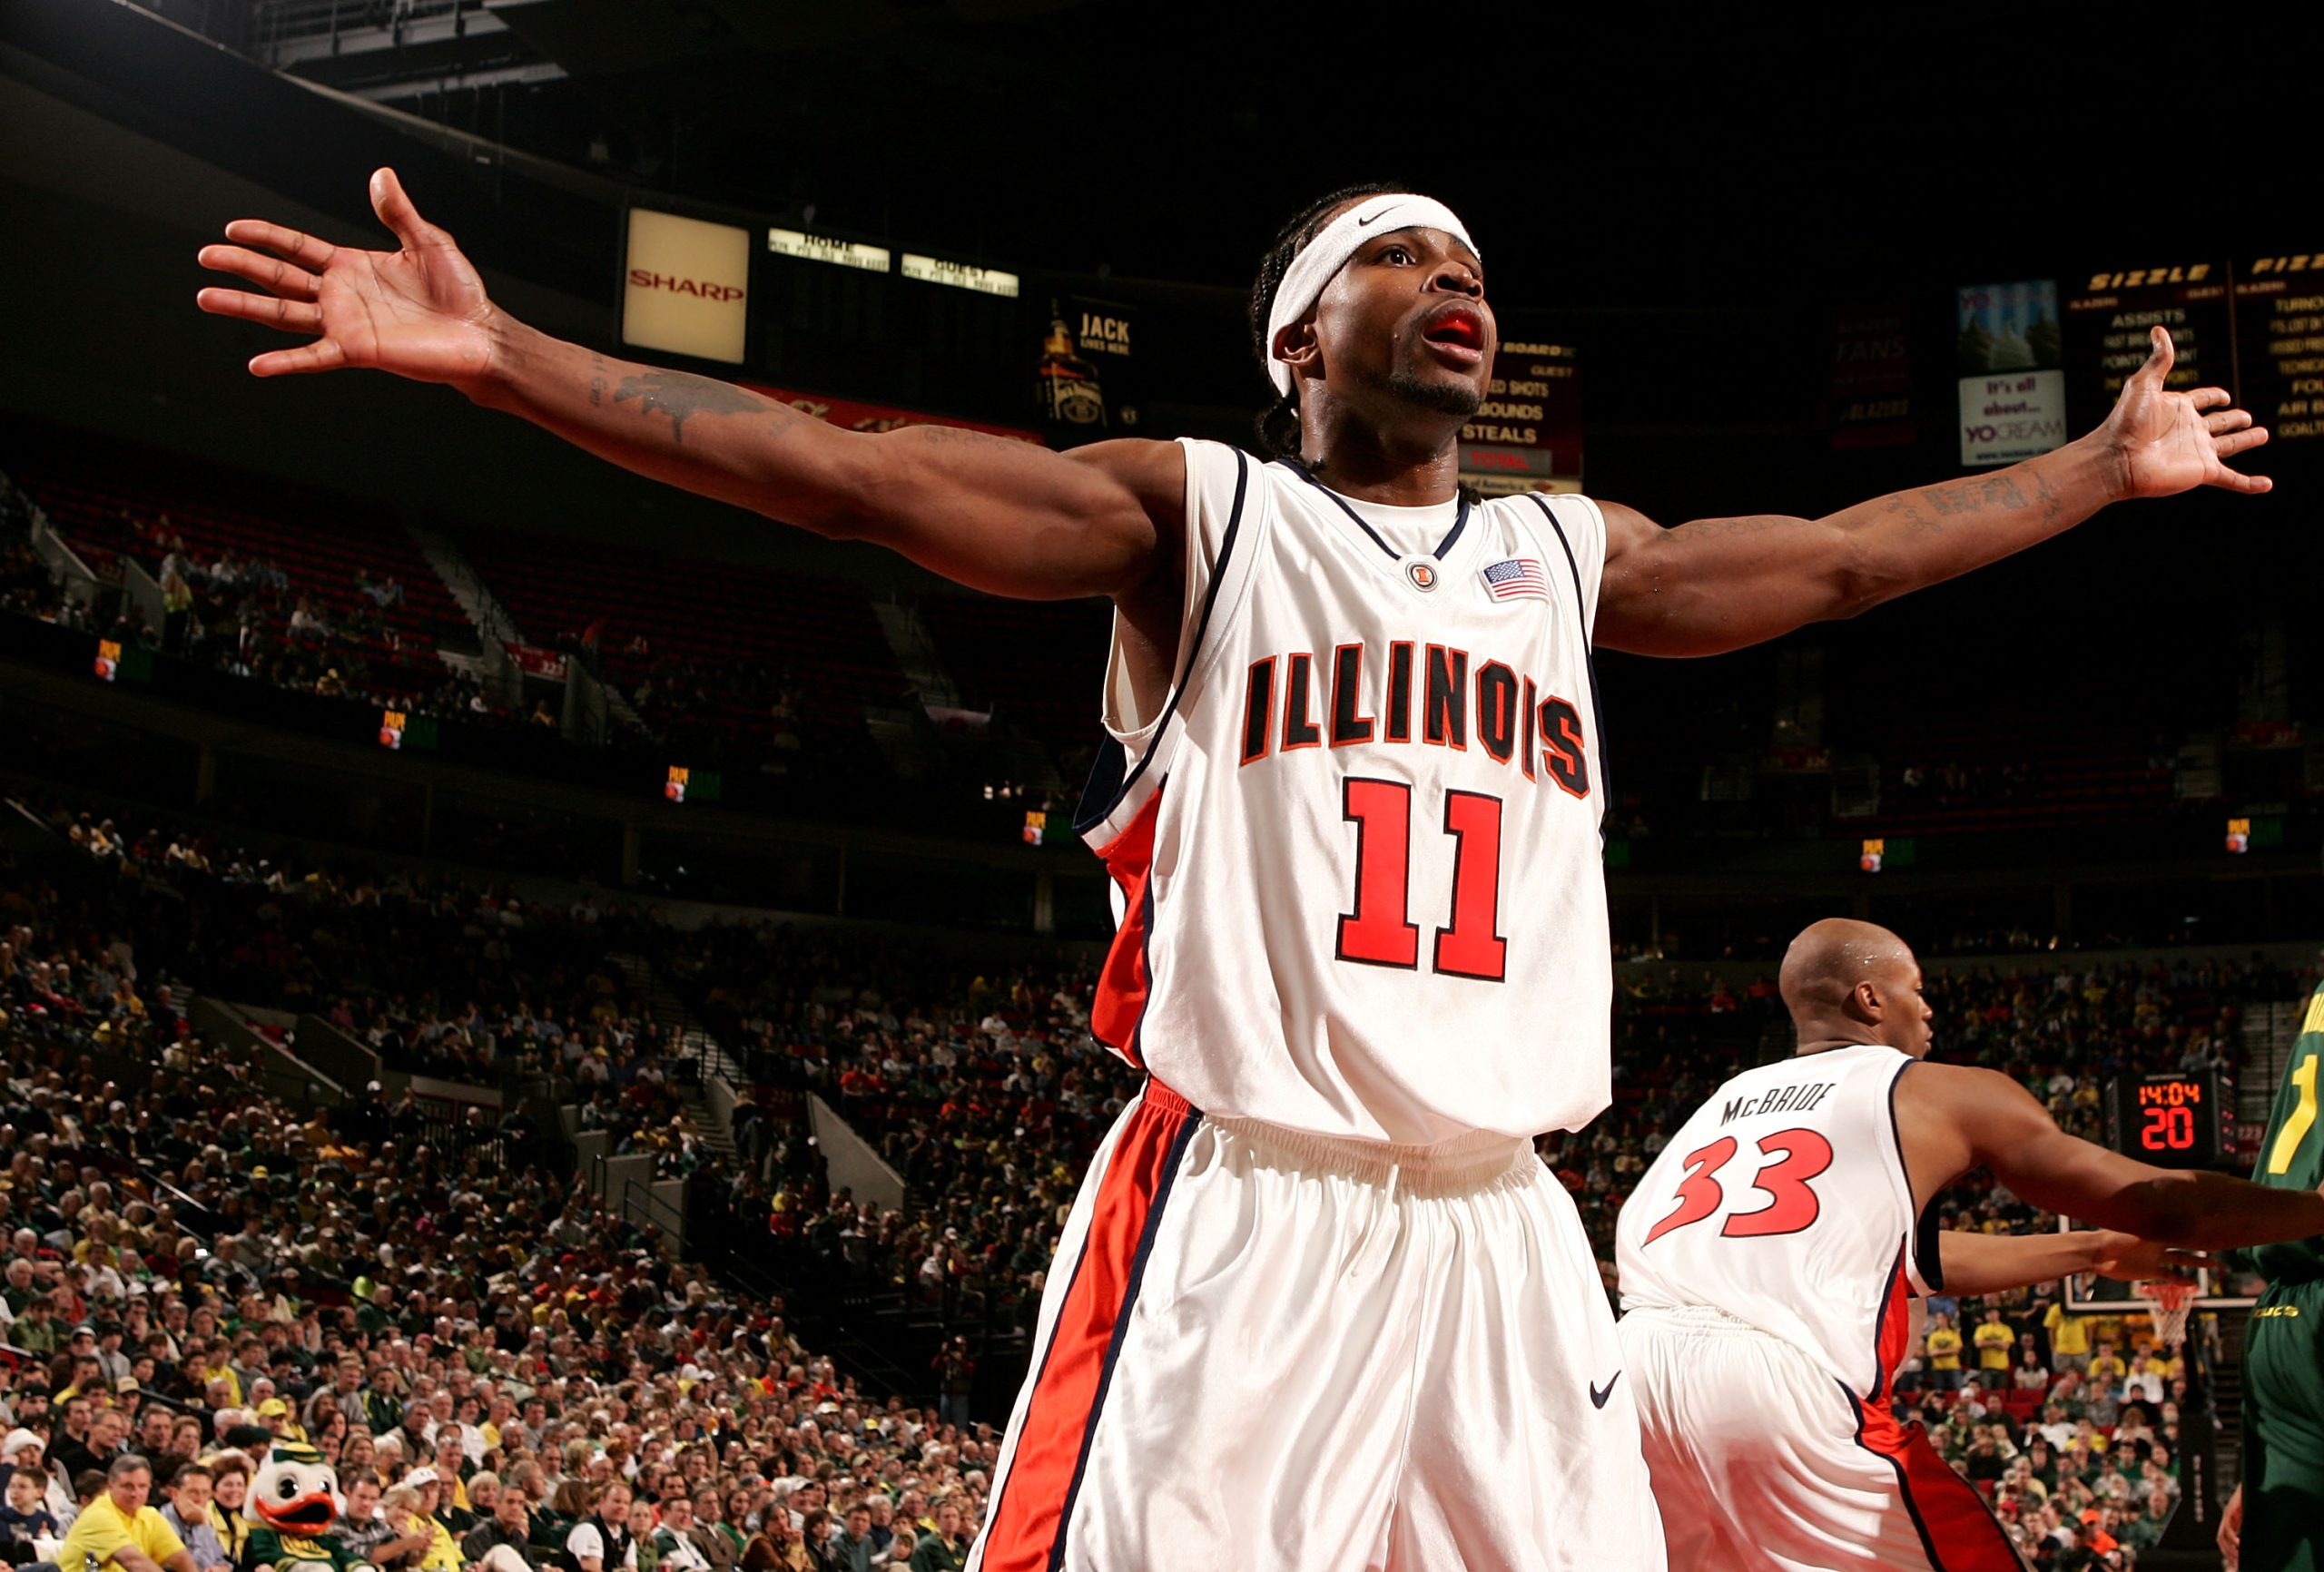 The 30 Most Influential NCAA MBB Teams of SLAM’s 30 Years: ’05 Illinois